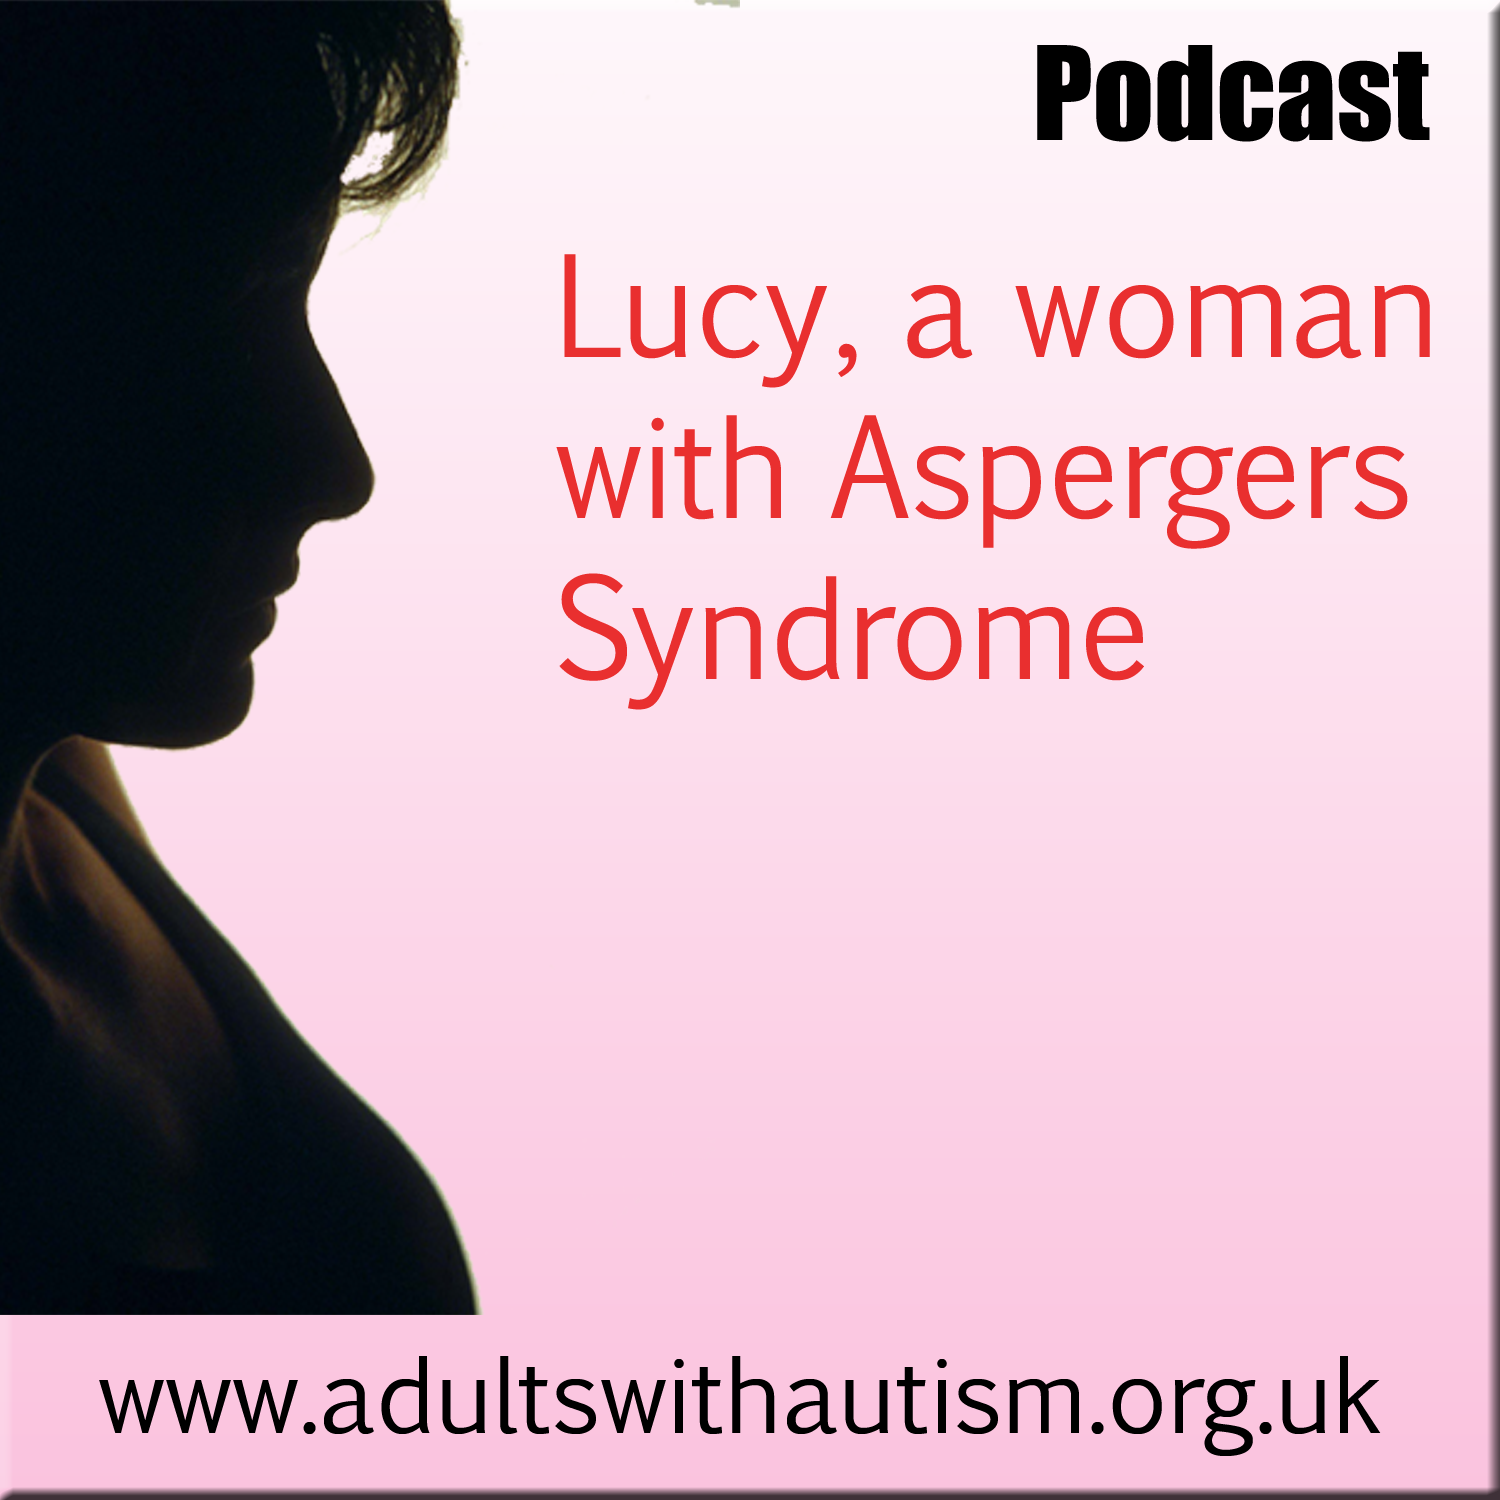 Lucy, a woman with Aspergers